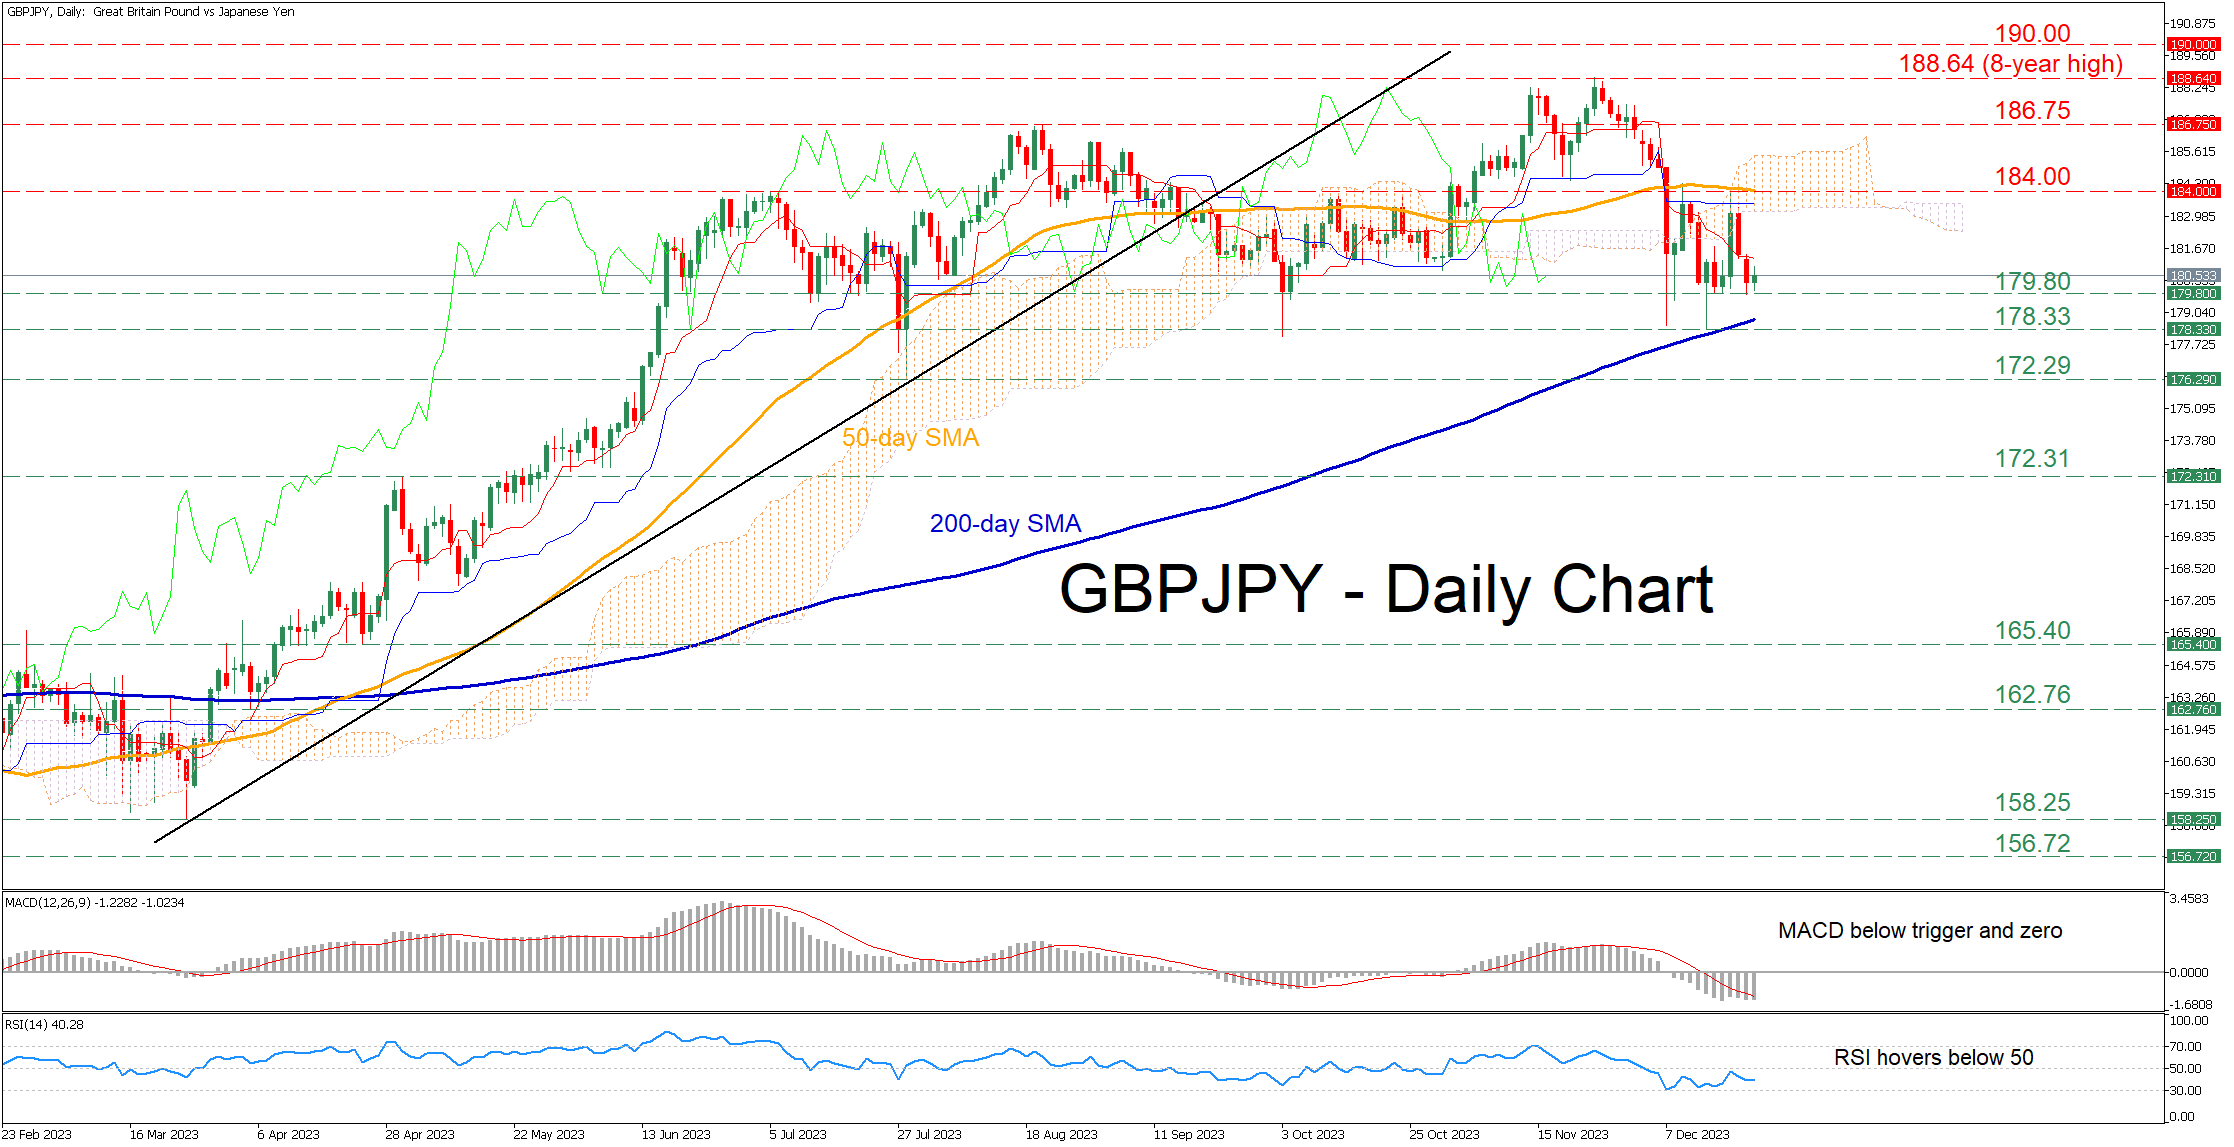 GBPJPY Faces Bearish Rejection at 50-Day SMA: A Consolidation Phase Emerging